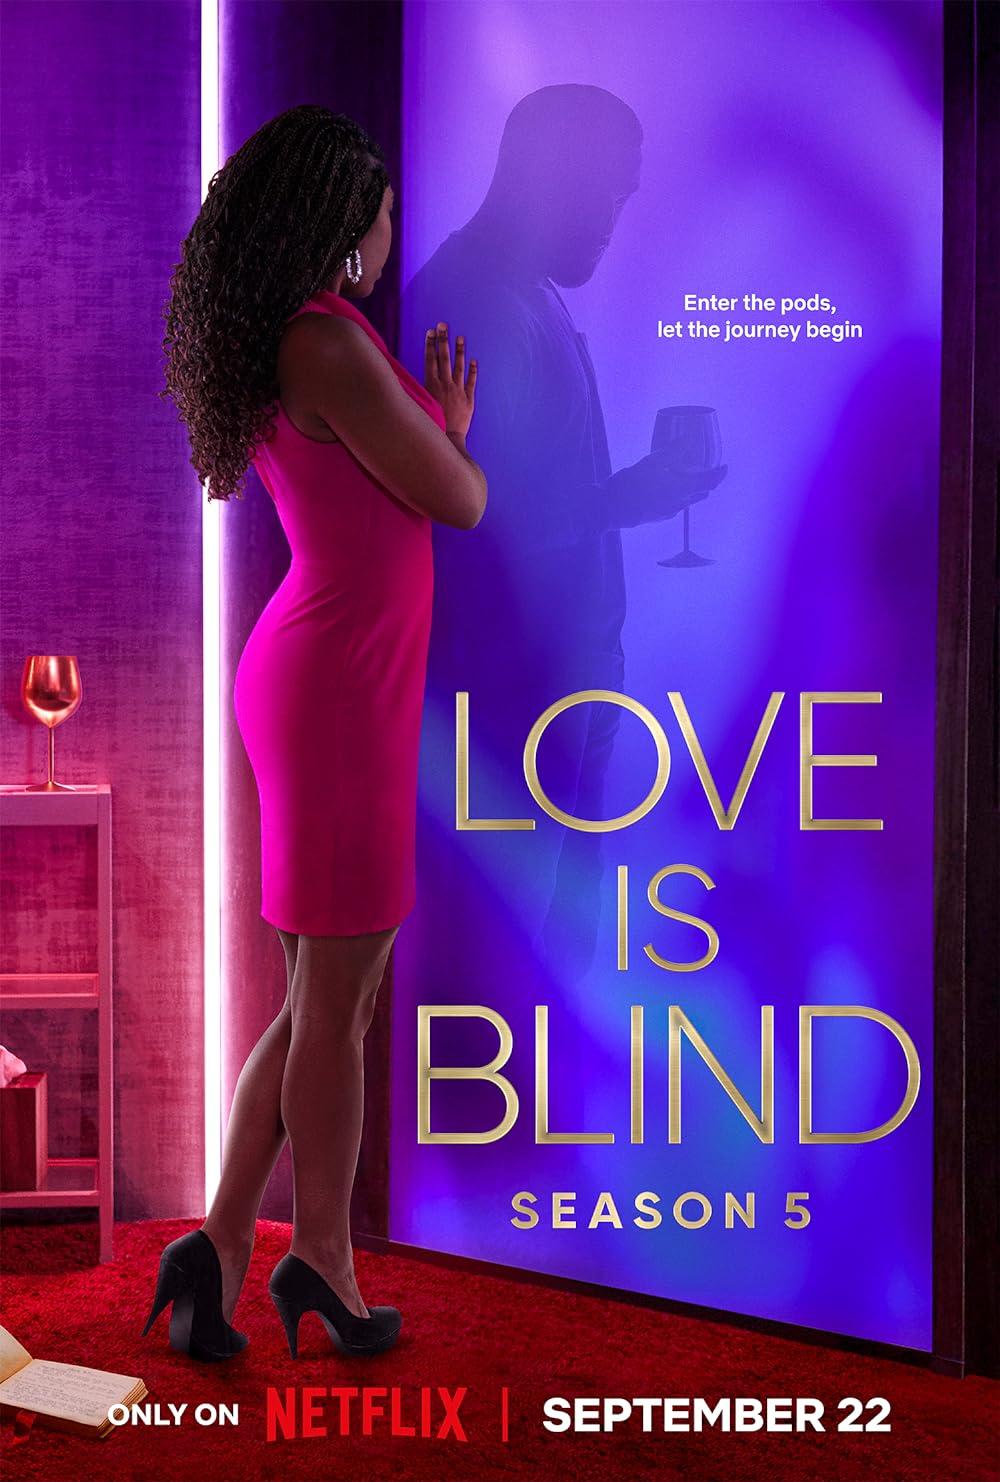 Love is Blind season 6 (February 14) - Streaming on NetflixLove is Blind returns for season 6 with captivating new journeys of romance and self-discovery. This season introduces a fresh group of singles from Charlotte, North Carolina, all eager to navigate the complexities of modern dating in search of genuine connections. Without the influence of physical appearance, these individuals engage in a series of blind dates, forming deep emotional bonds inside the pods before deciding to get engaged. As they transition from the pods to the real world, the couples will live together, facing the ultimate test of their relationships when confronted with real-world challenges.